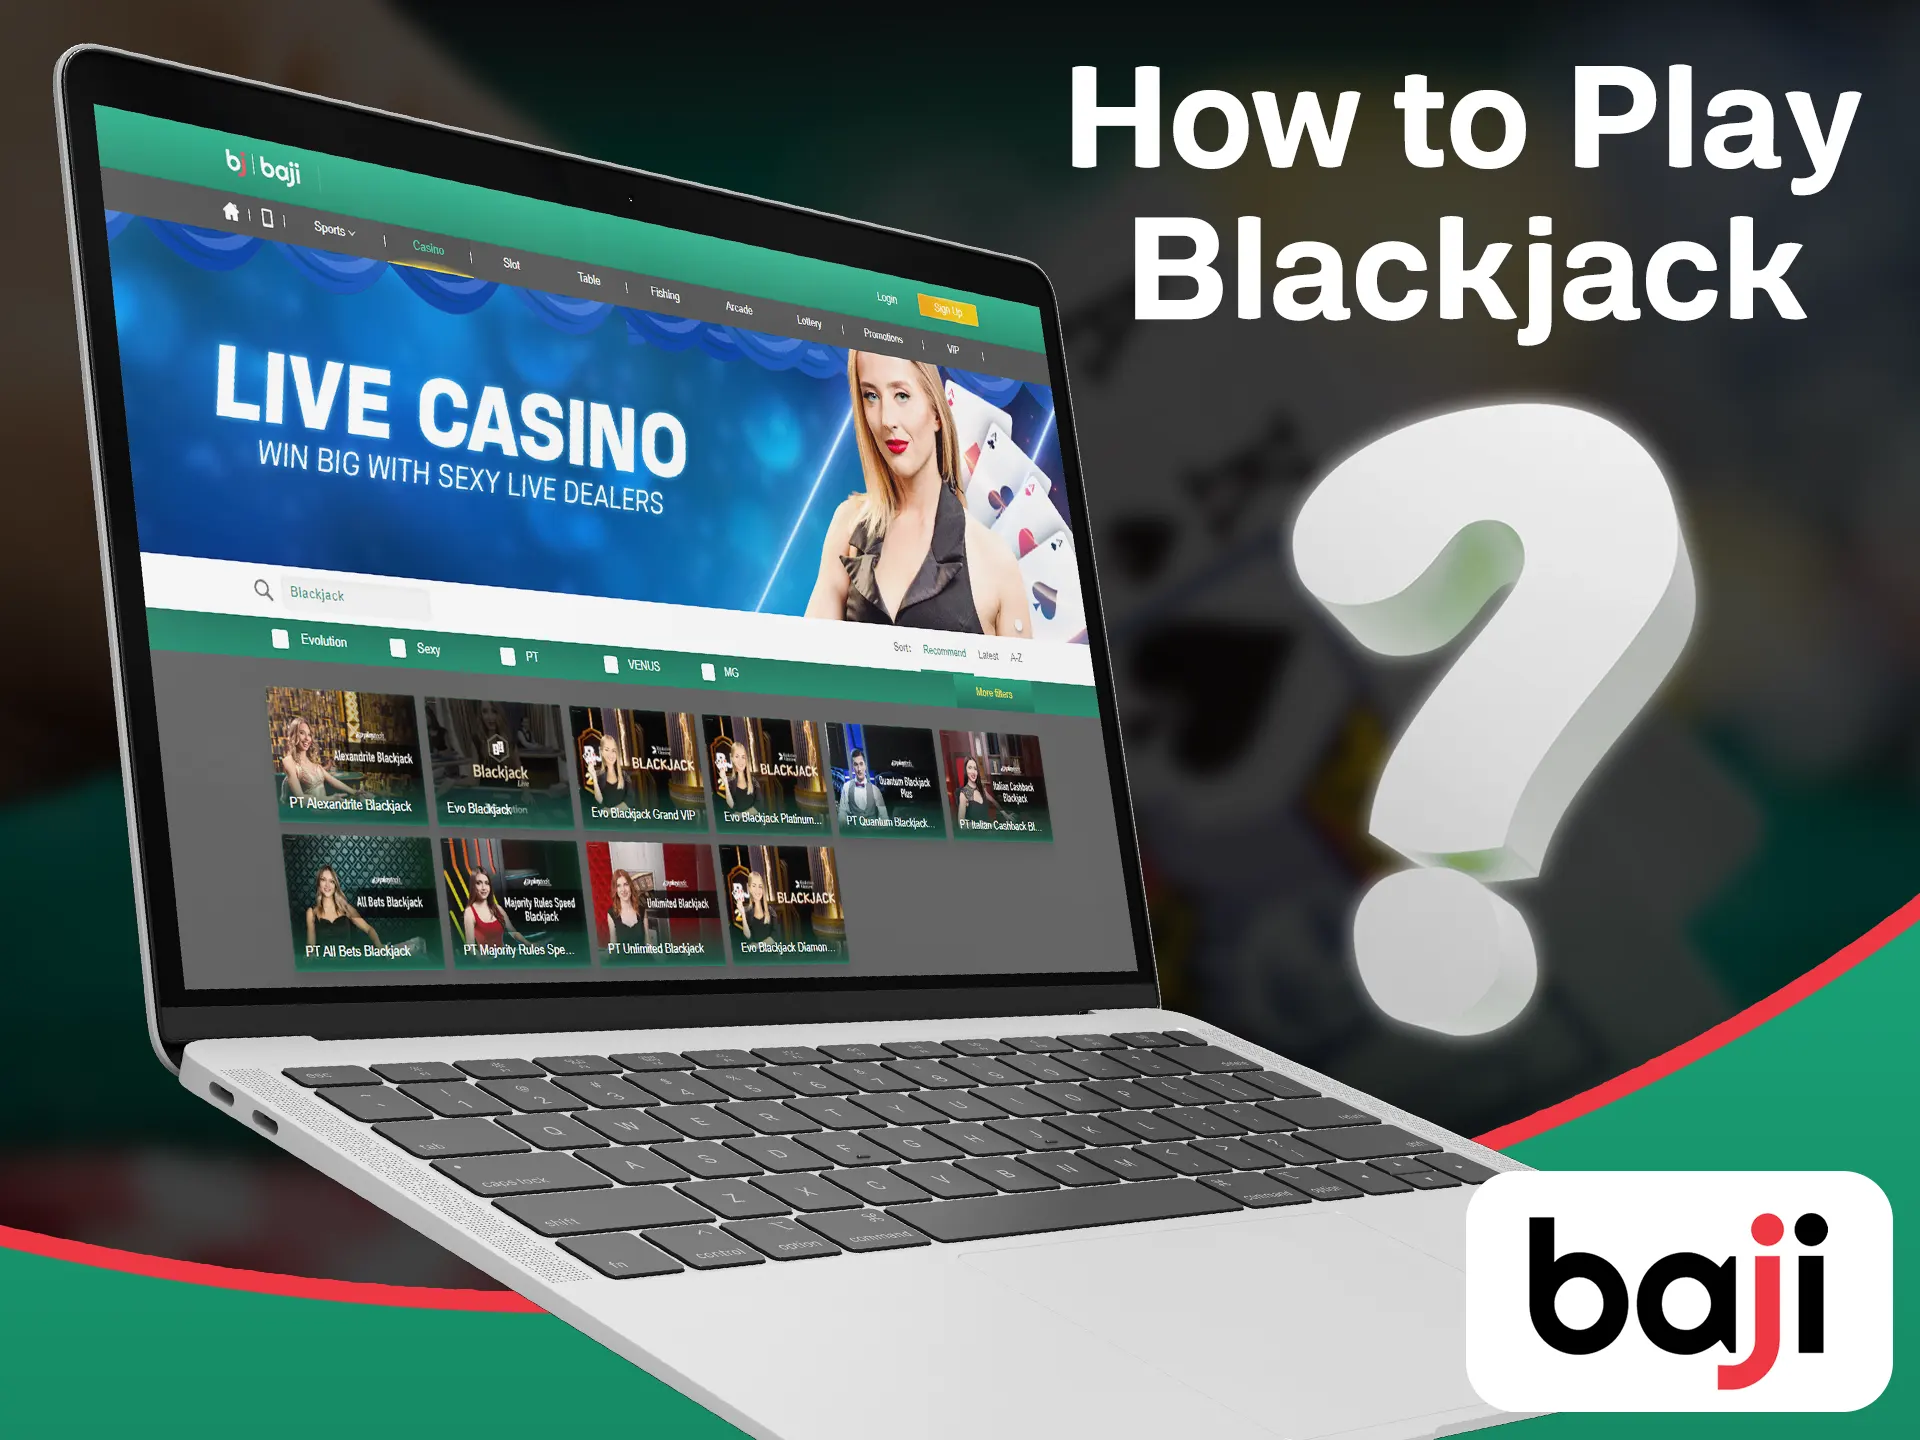 Learn how to play blackjack games with the Baji.